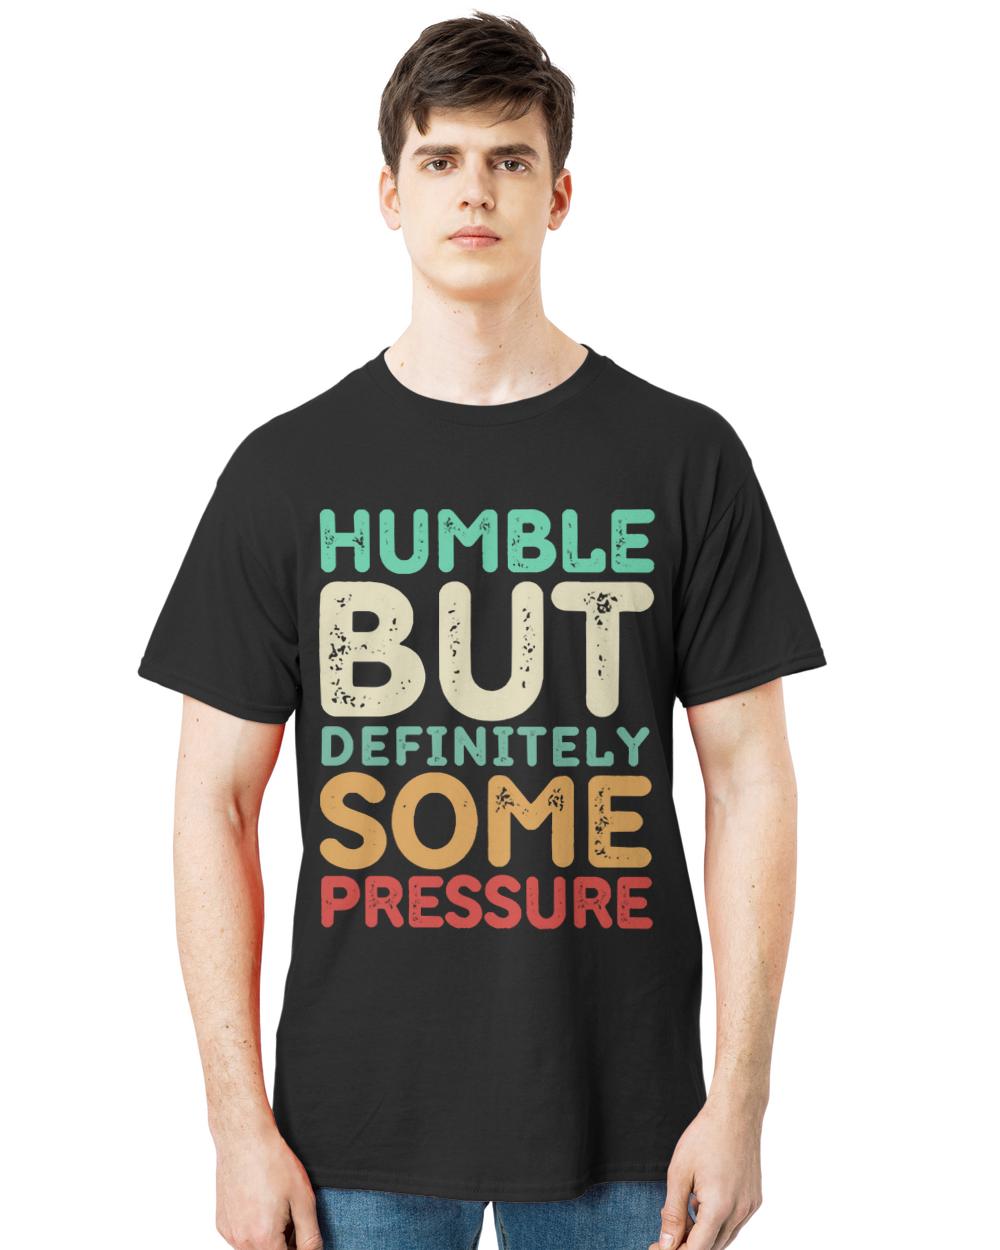 Humble But Definitely Some Pressure T-ShirtHumble But Definitely Some Pressure Funny Saying Quote T-Shirt (1)